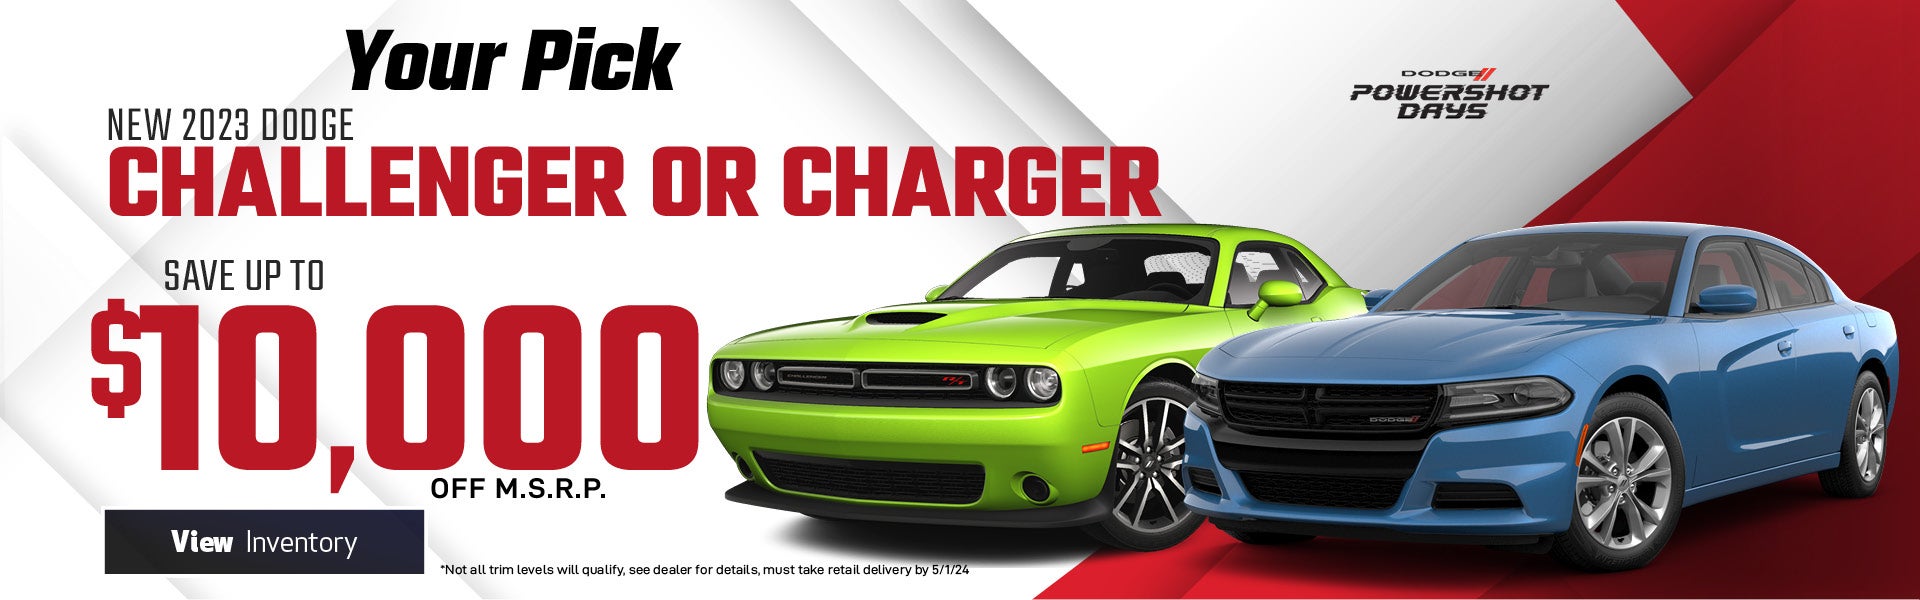 2023 Dodge Charger and challenger 